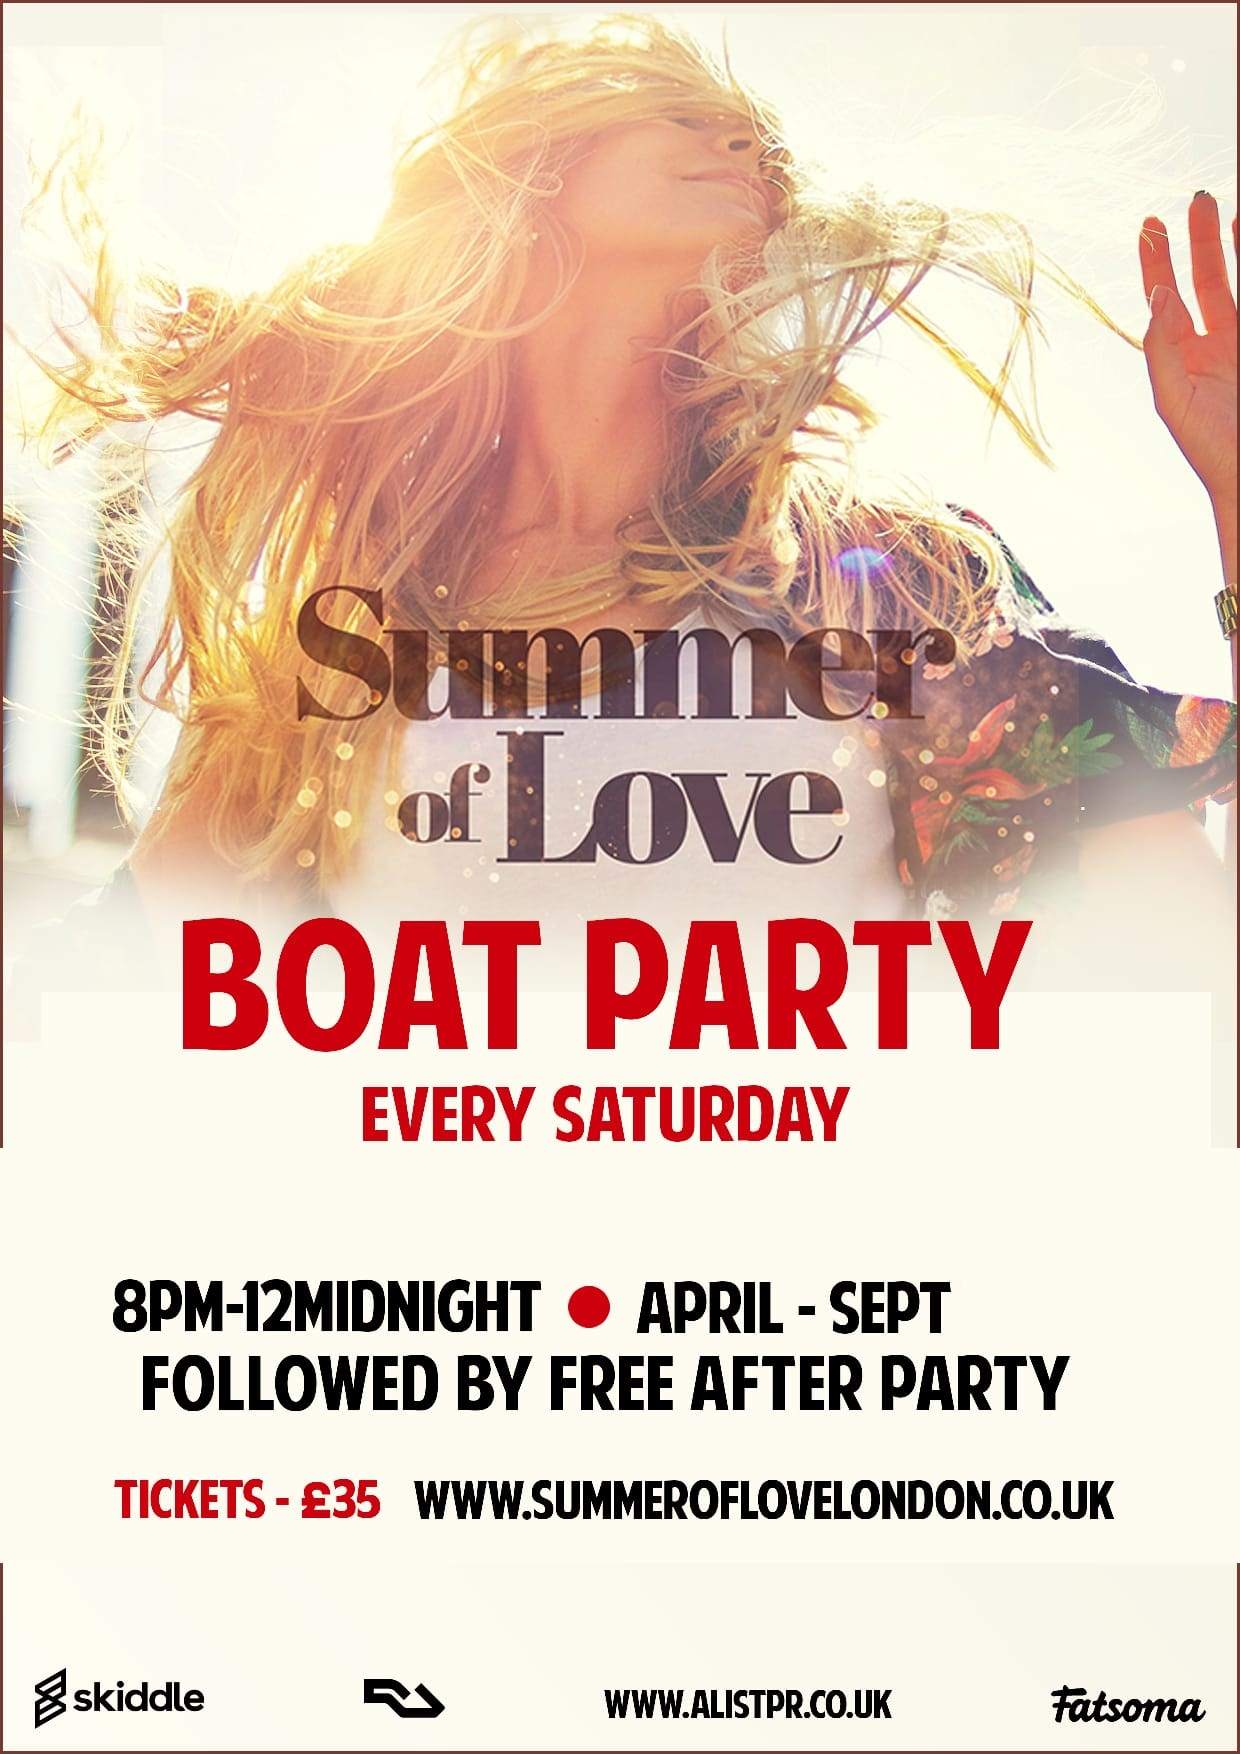 Summer of Love - London party boat + free after party Egg - Página trasera